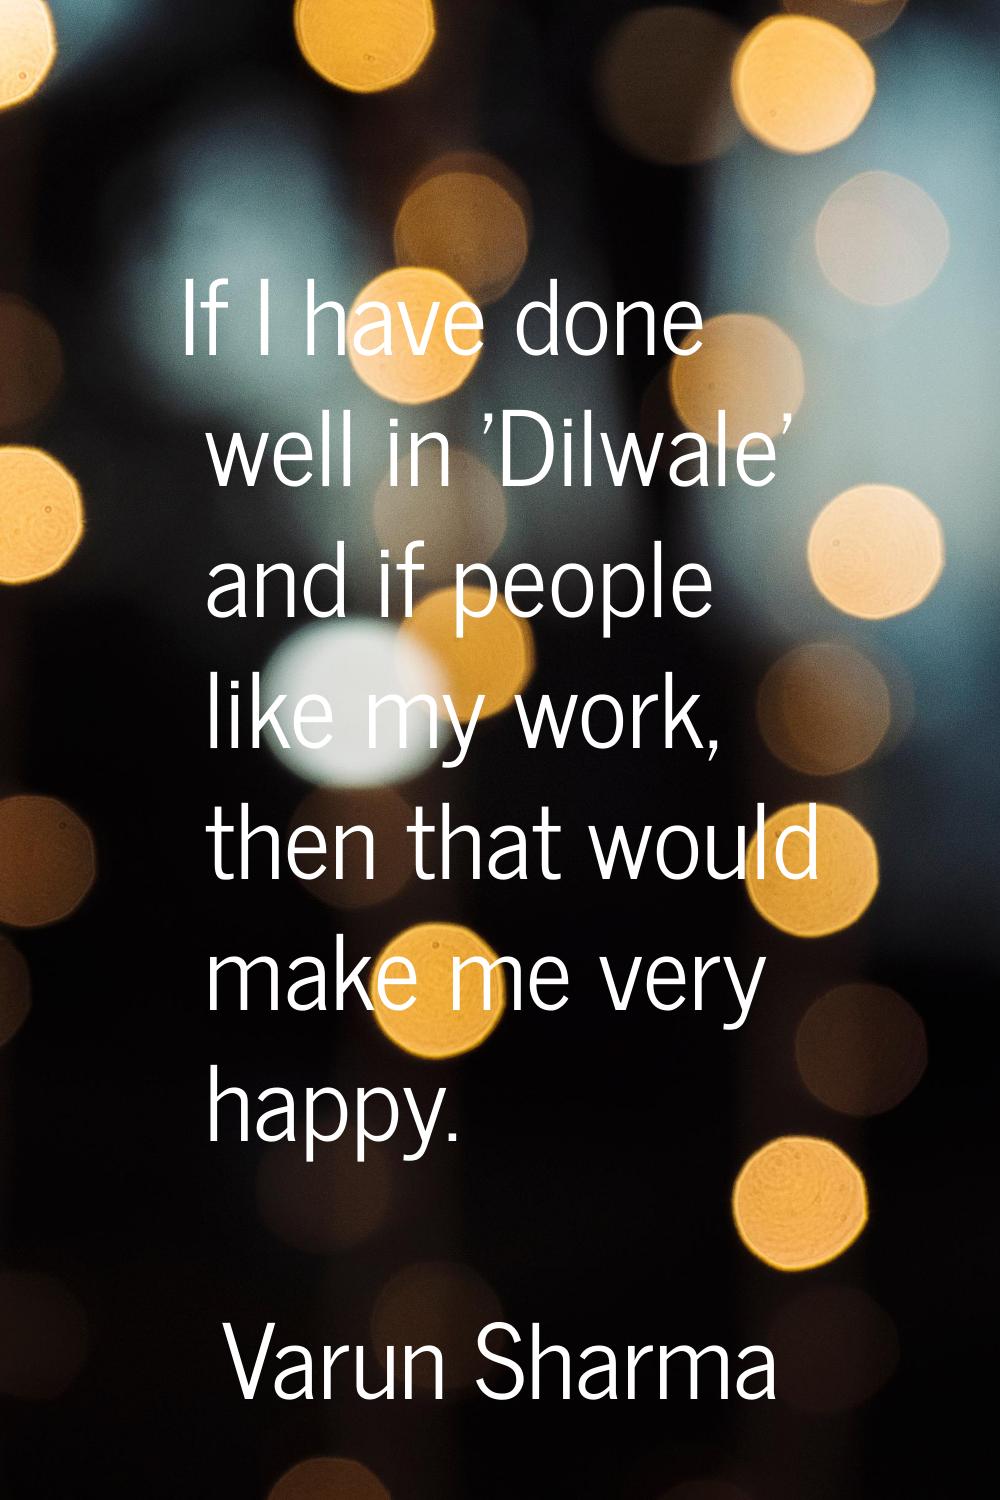 If I have done well in 'Dilwale' and if people like my work, then that would make me very happy.